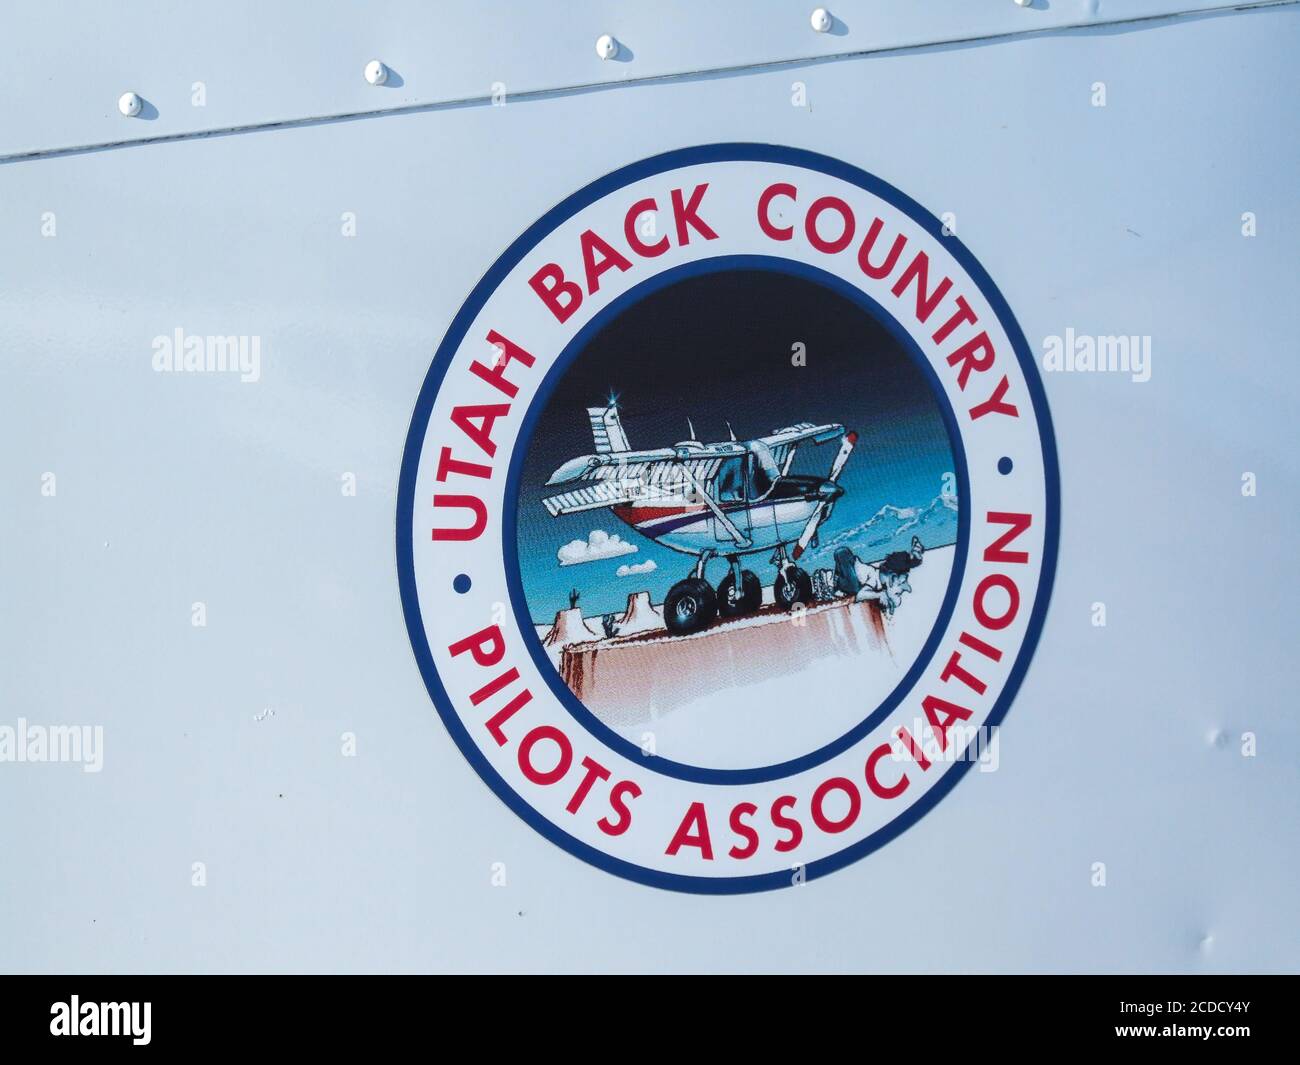 The logo of the Utah Backcountry Pilots Association painted on the tail of a Cessna 185 Skywagon at a remote backcountry airstrip near Moab, Utah. Stock Photo